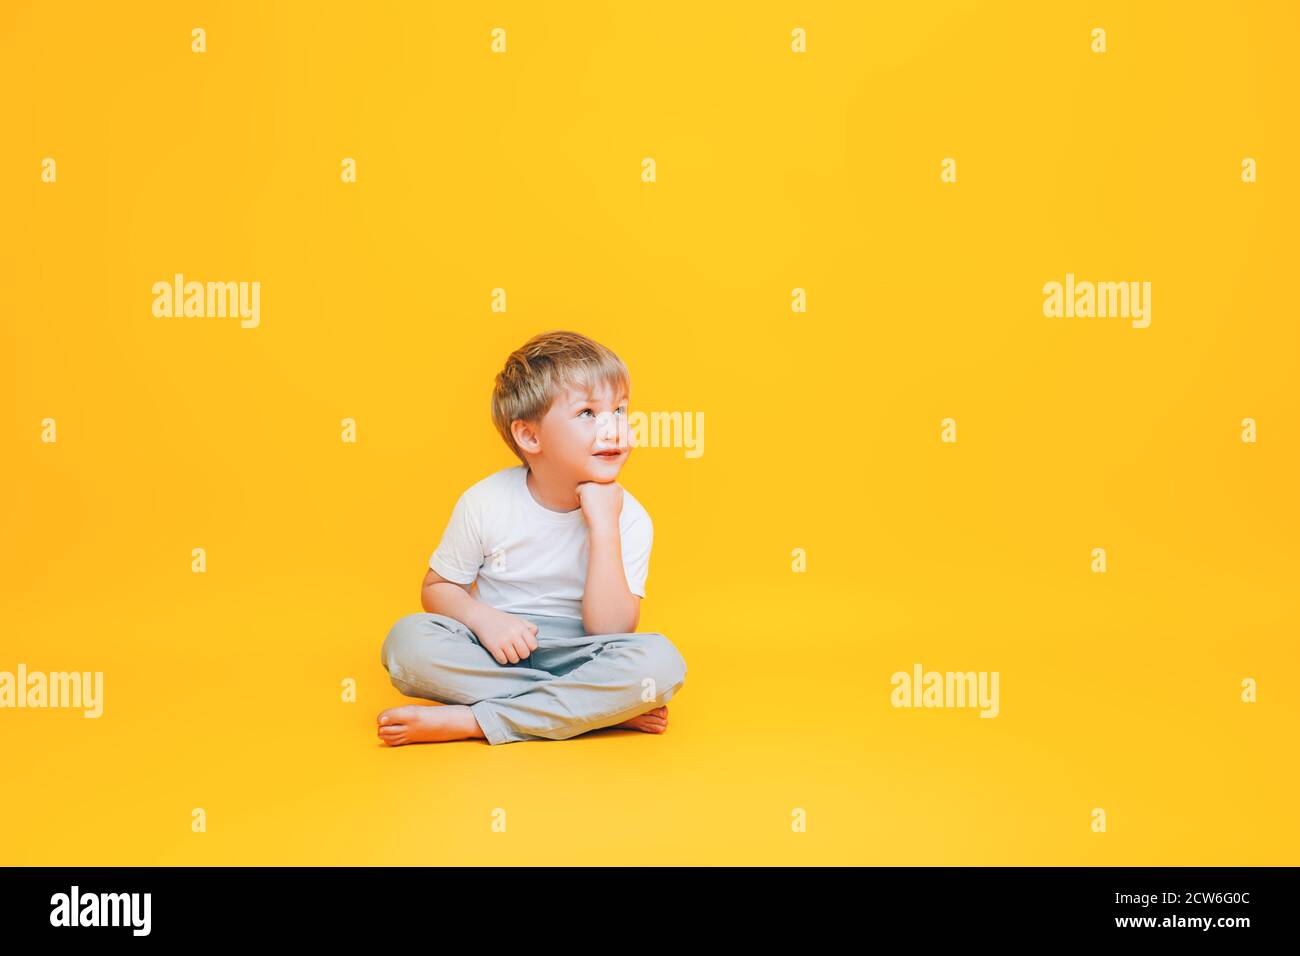 Pensive little boy in white t-shirt sitting on yellow background Stock Photo